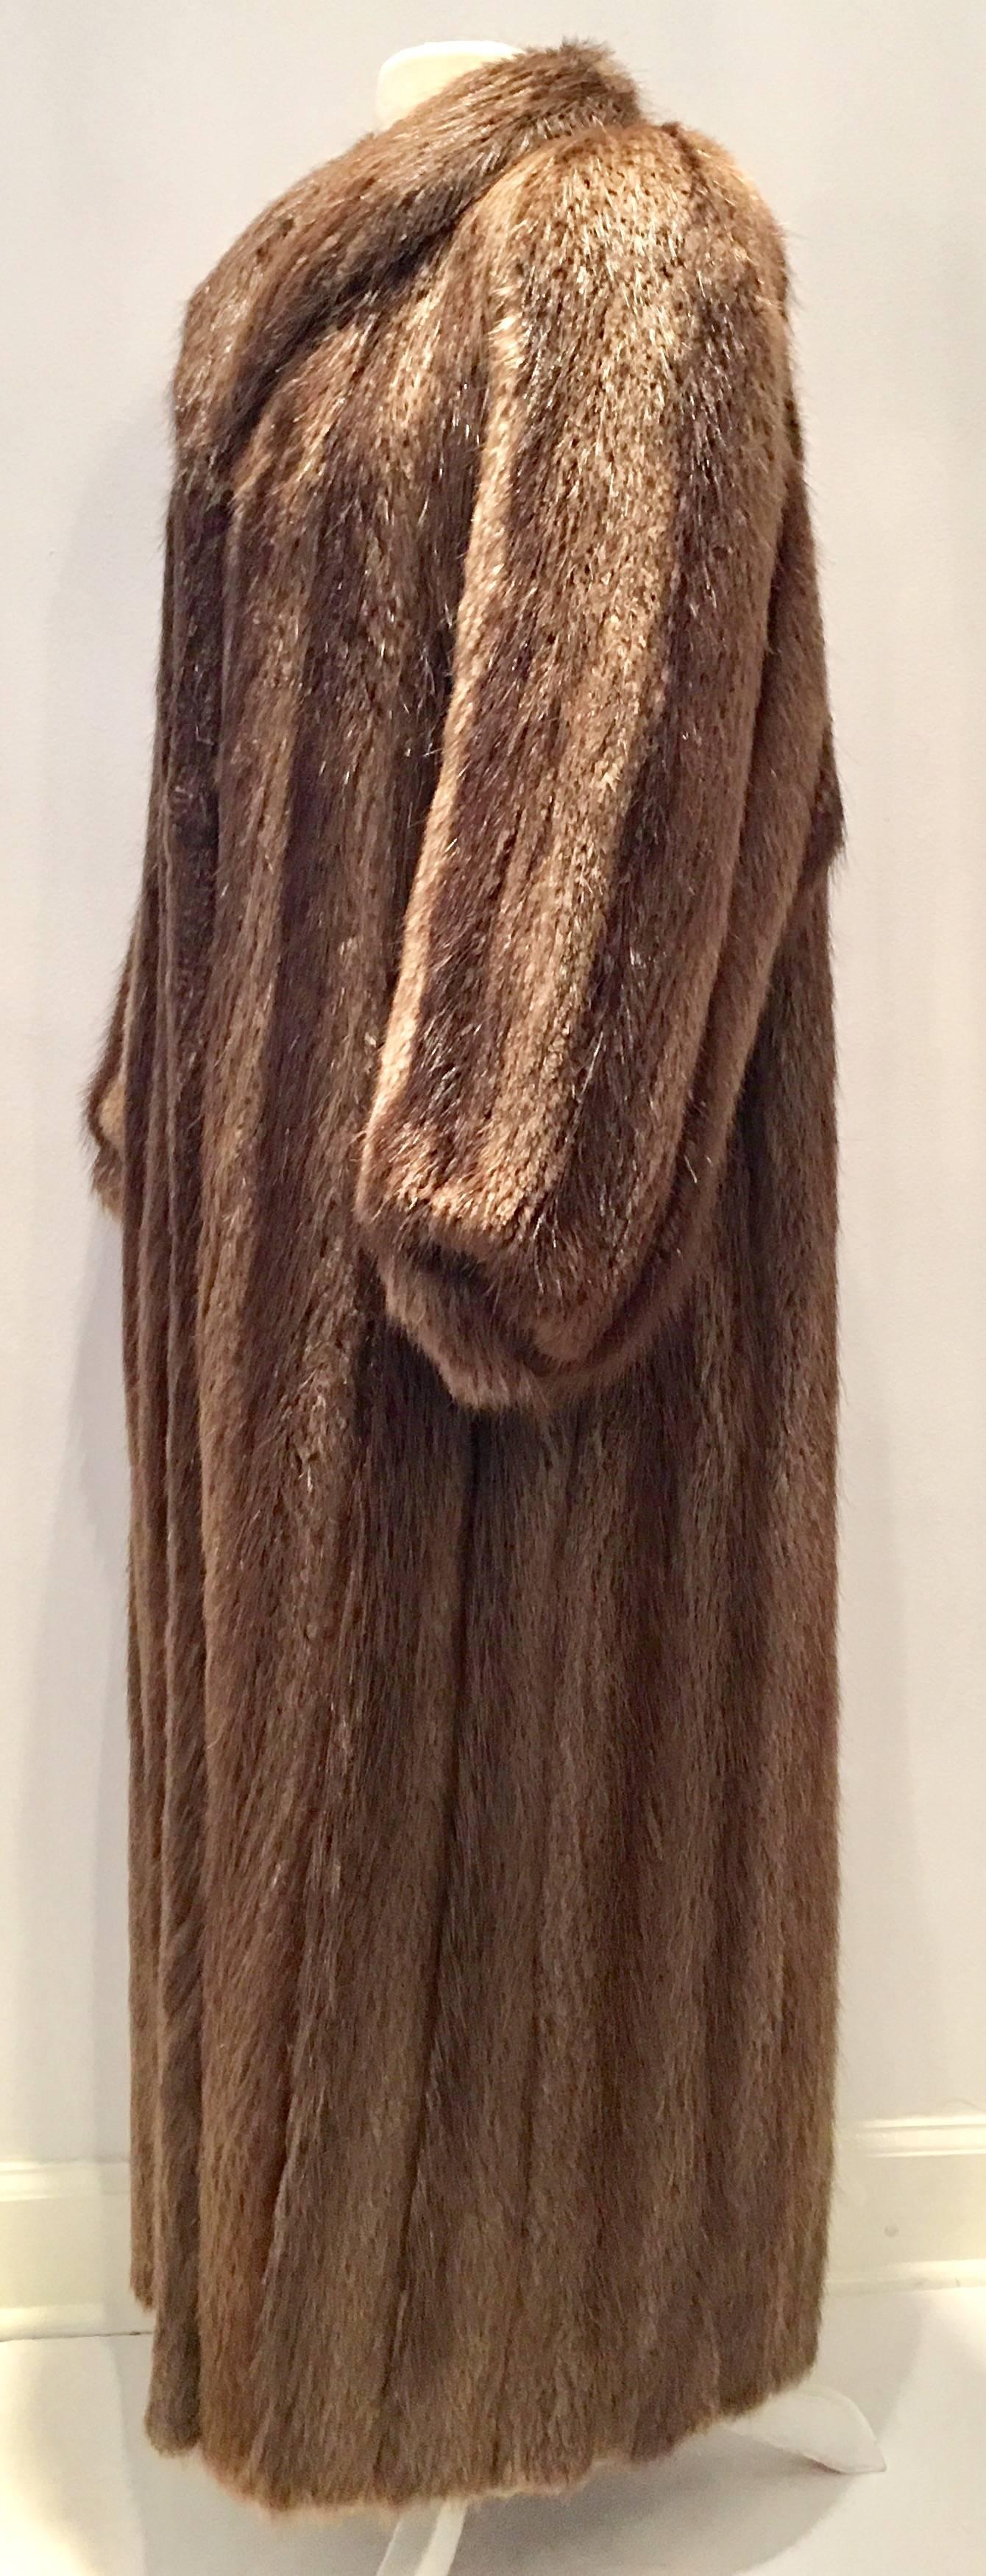 1990'S fine long hair beaver fur full length coat. Semi-aquatic builder of dams, the beaver is one of the warmest natural furs available on the market. Beaver is the best fur to recycle, perhaps into a home accessory item or retrofitted into an